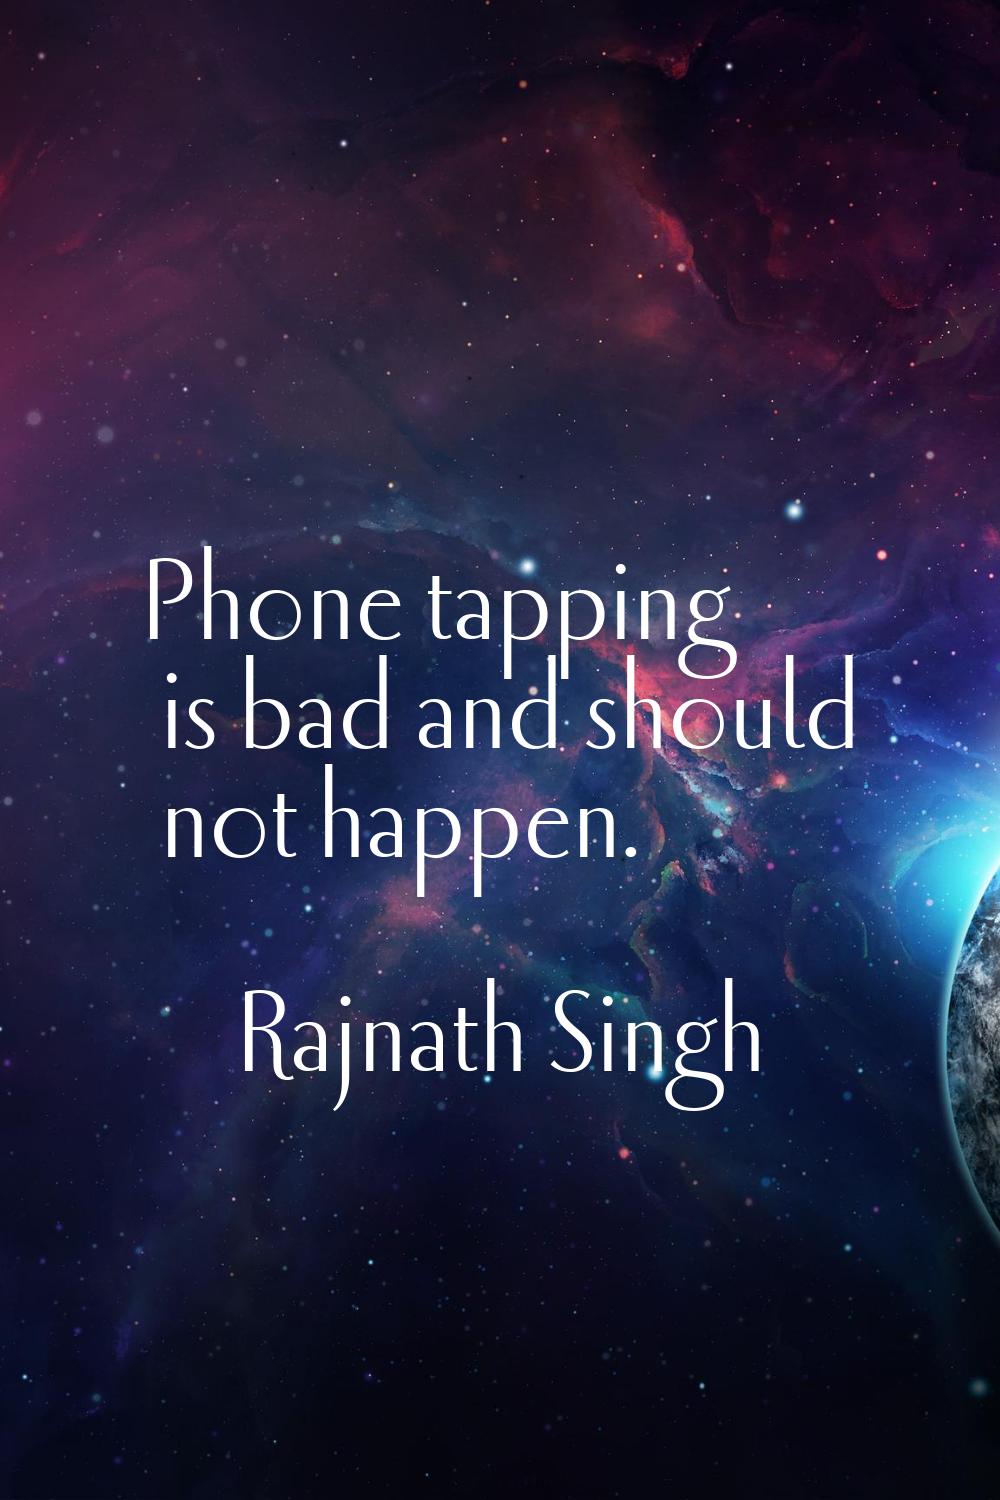 Phone tapping is bad and should not happen.